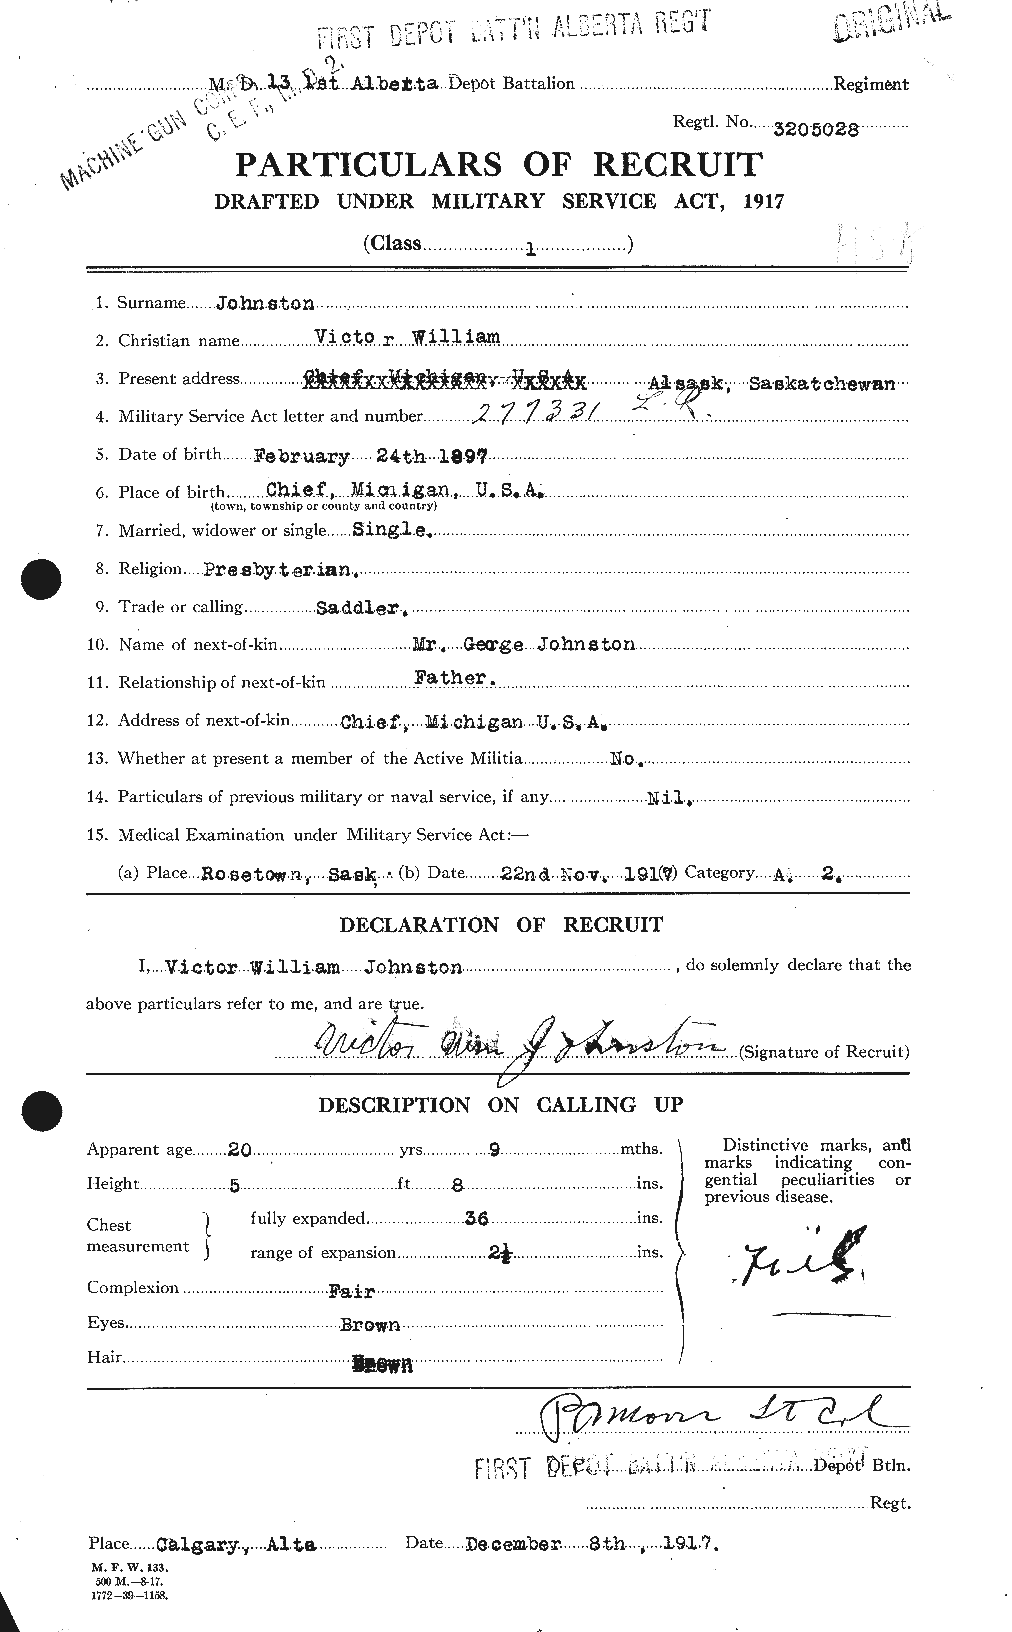 Personnel Records of the First World War - CEF 427192a